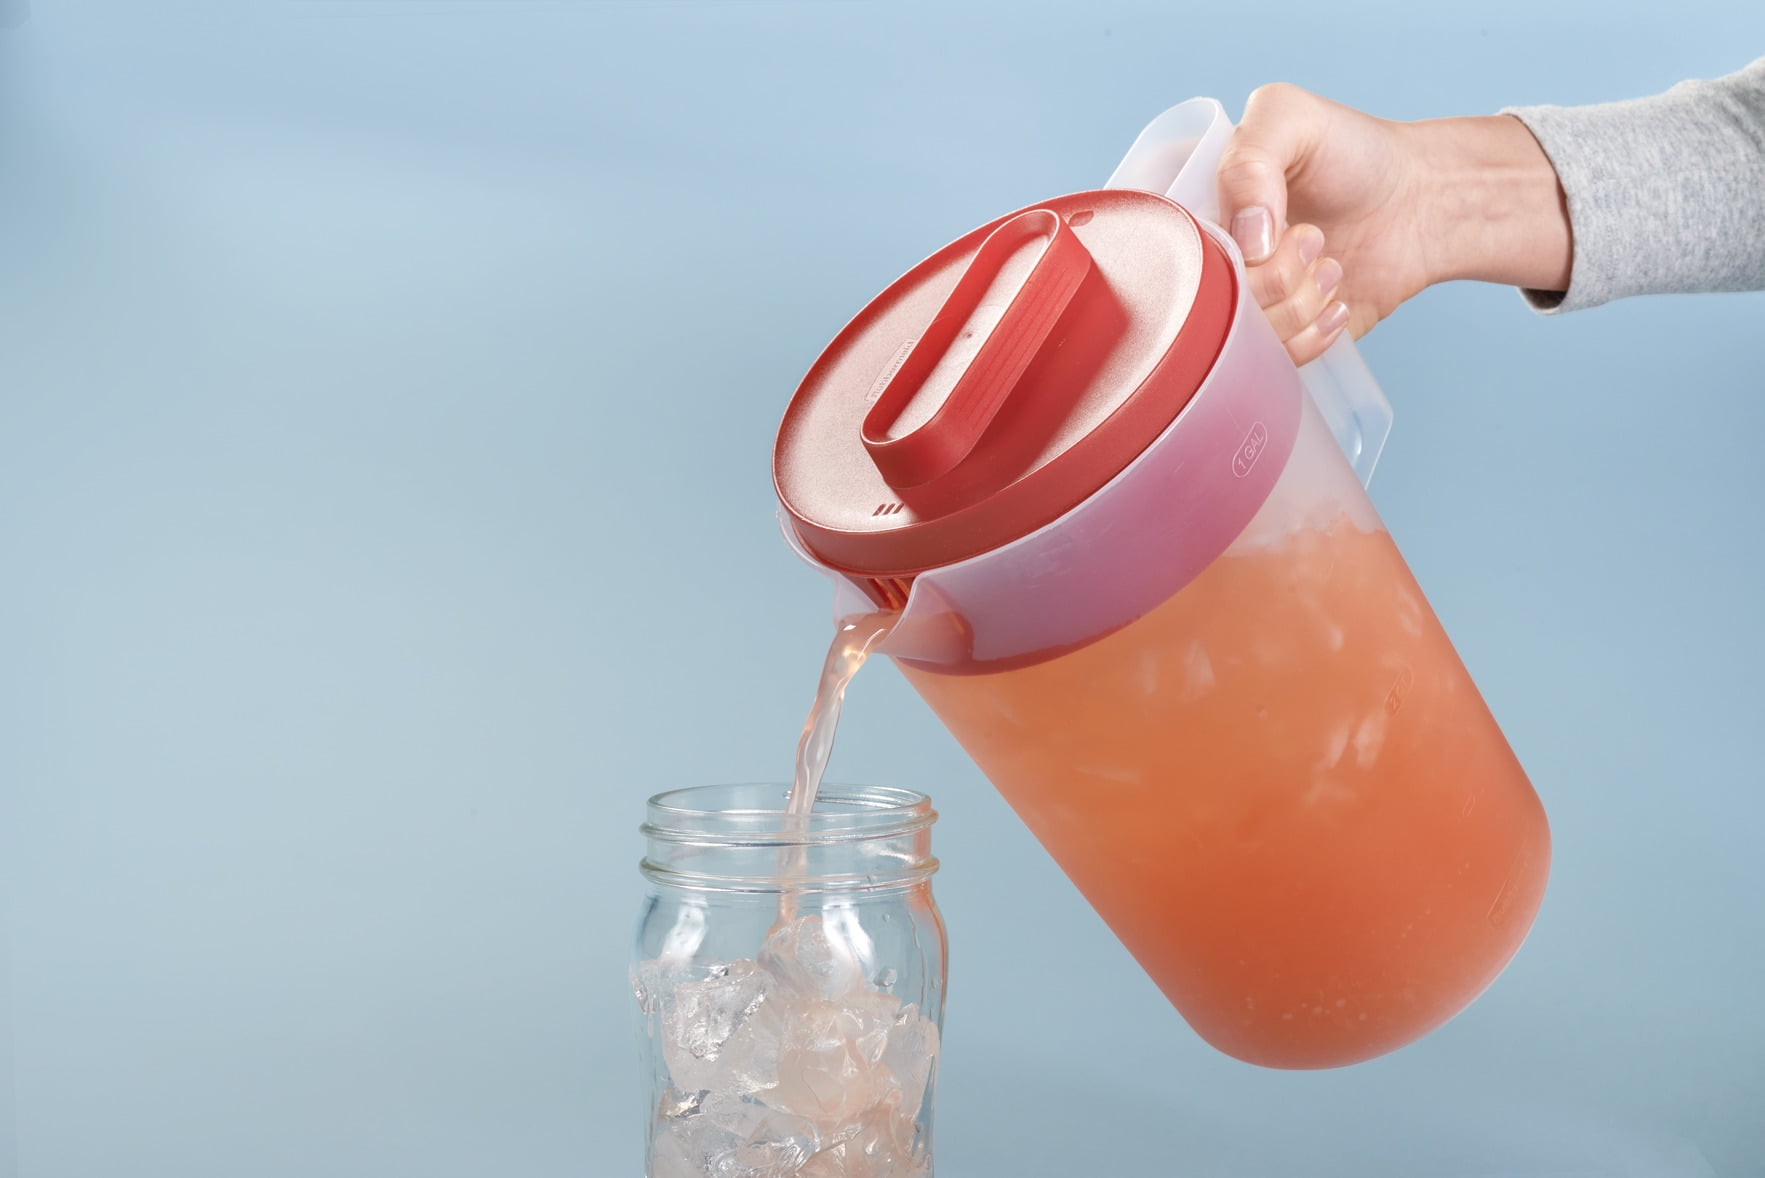 Simply Pour® Pitcher, Plastic Pitcher with Multifunction Lid